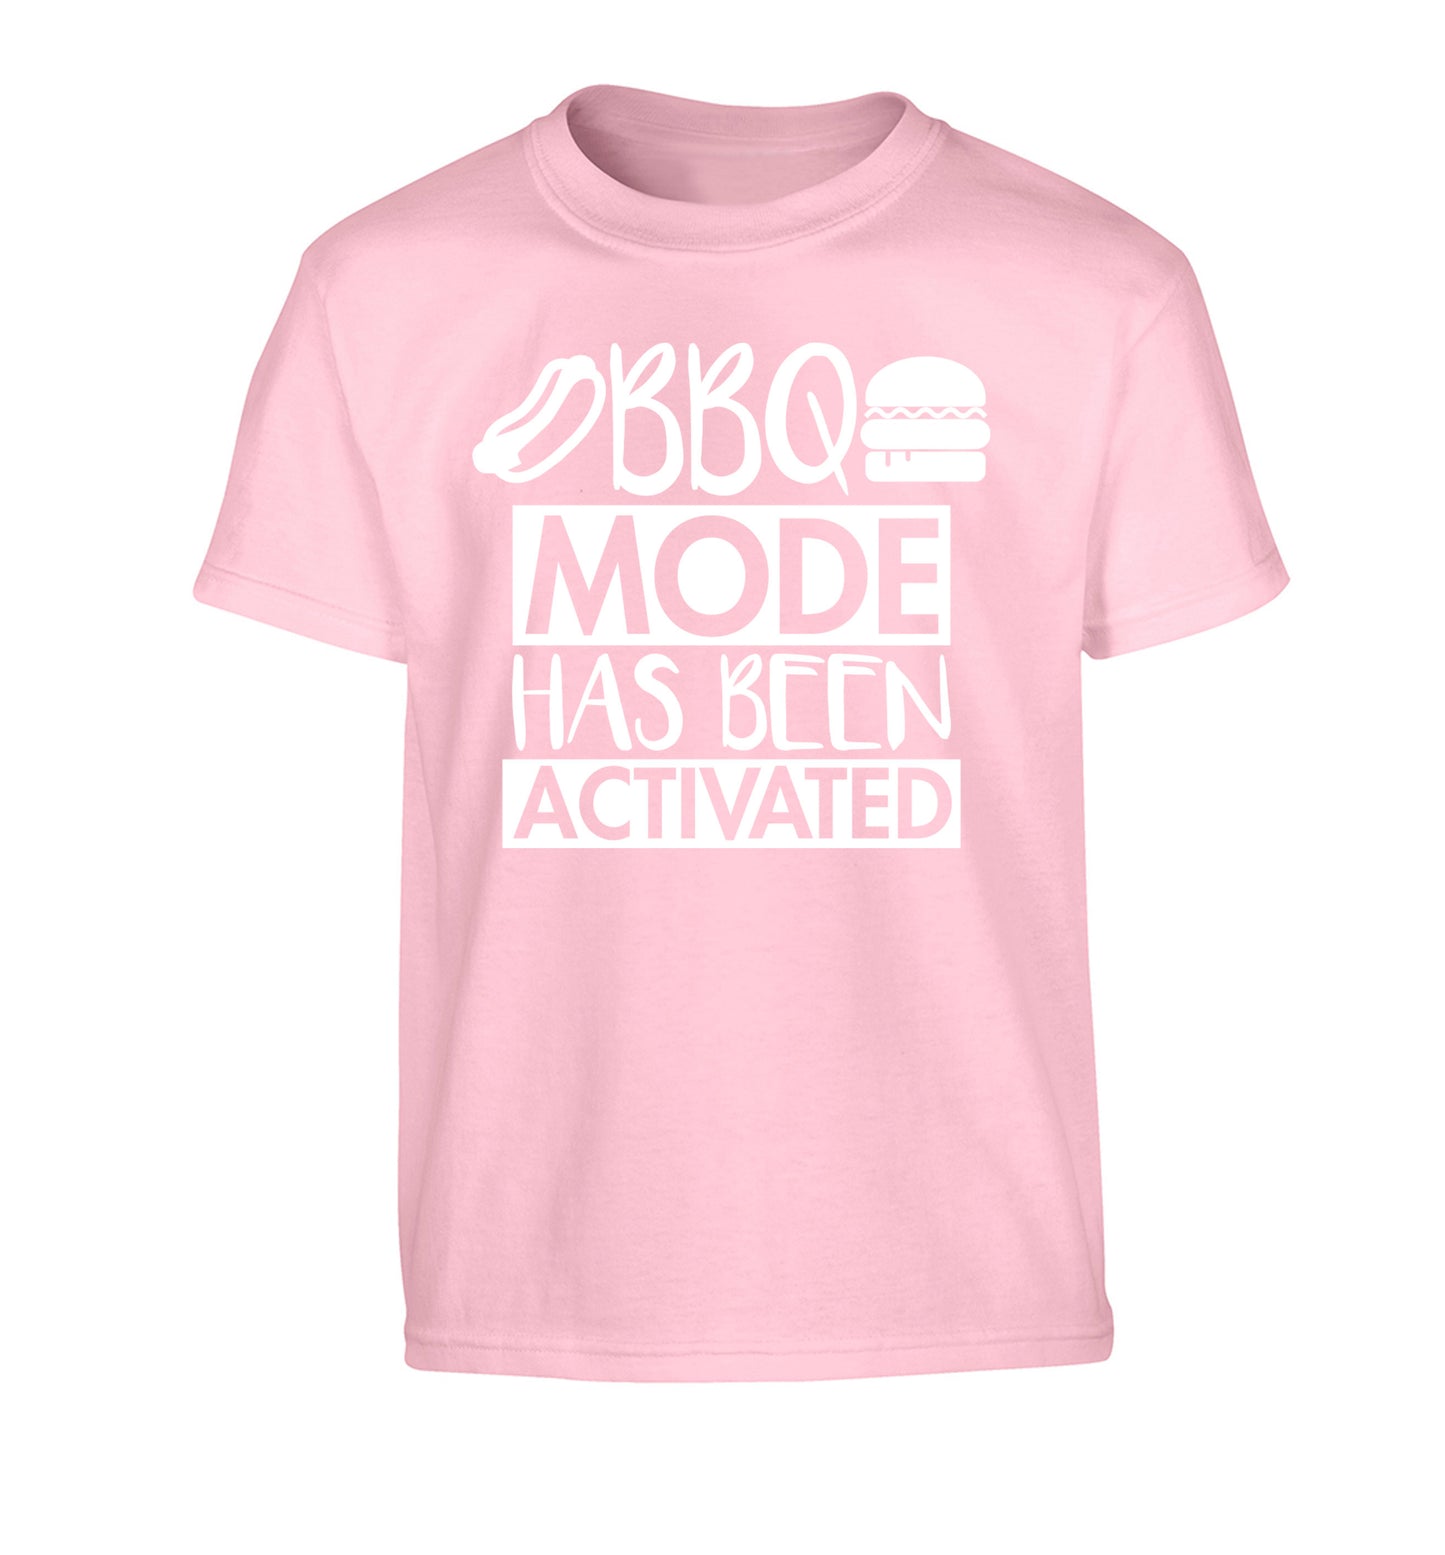 Bbq mode has been activated Children's light pink Tshirt 12-14 Years